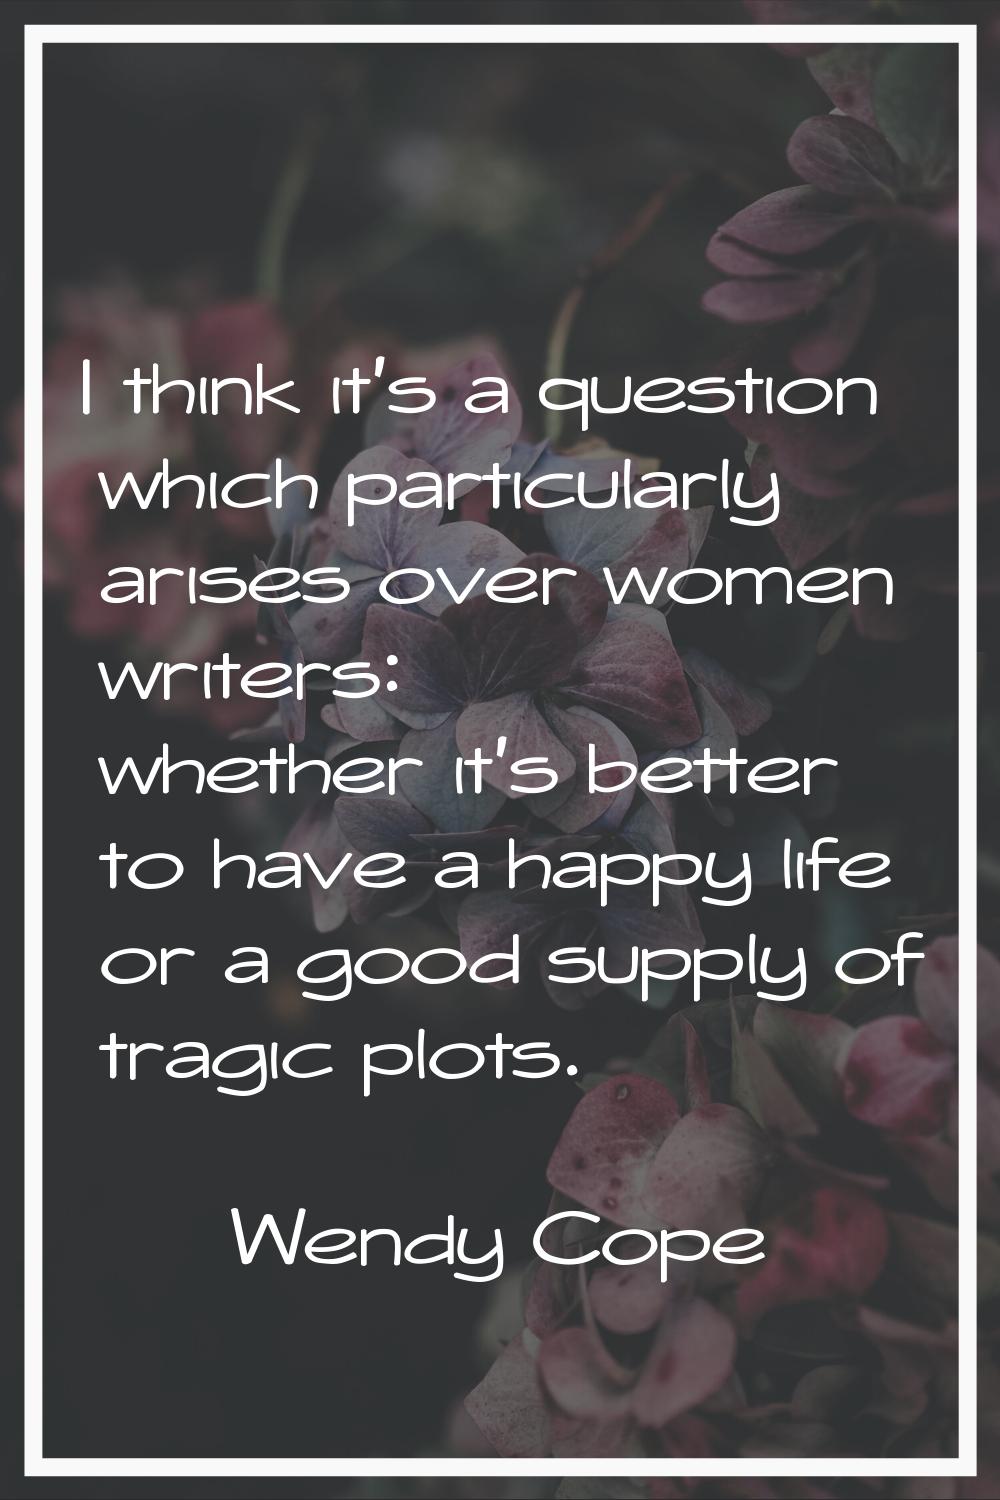 I think it's a question which particularly arises over women writers: whether it's better to have a